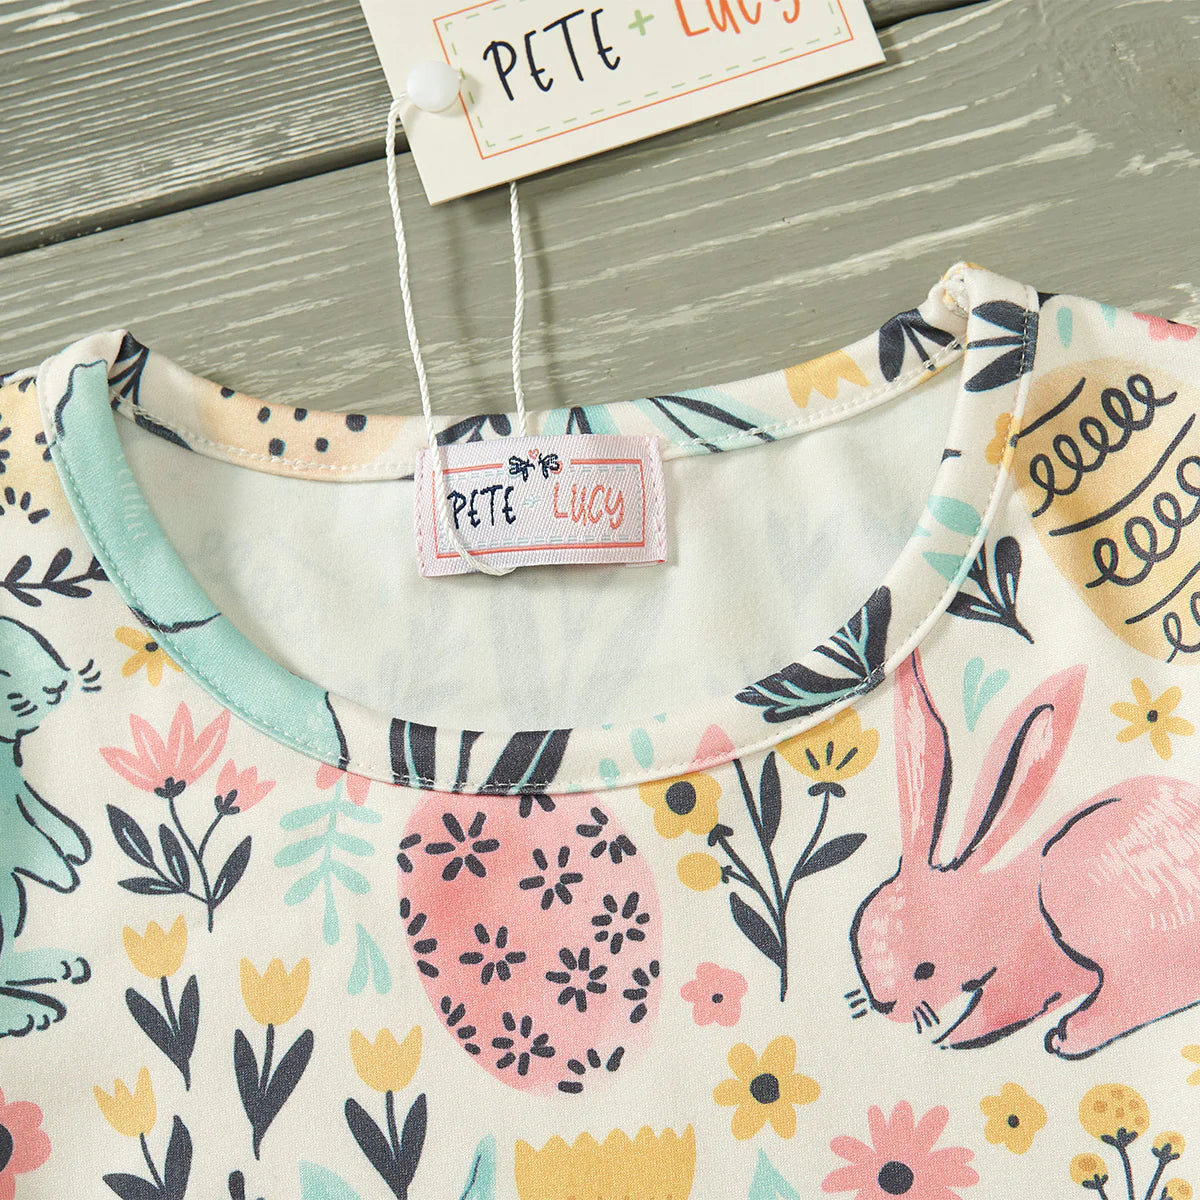 (Preorder) Bunnies in Bloom Tulle by Pete + Lucy